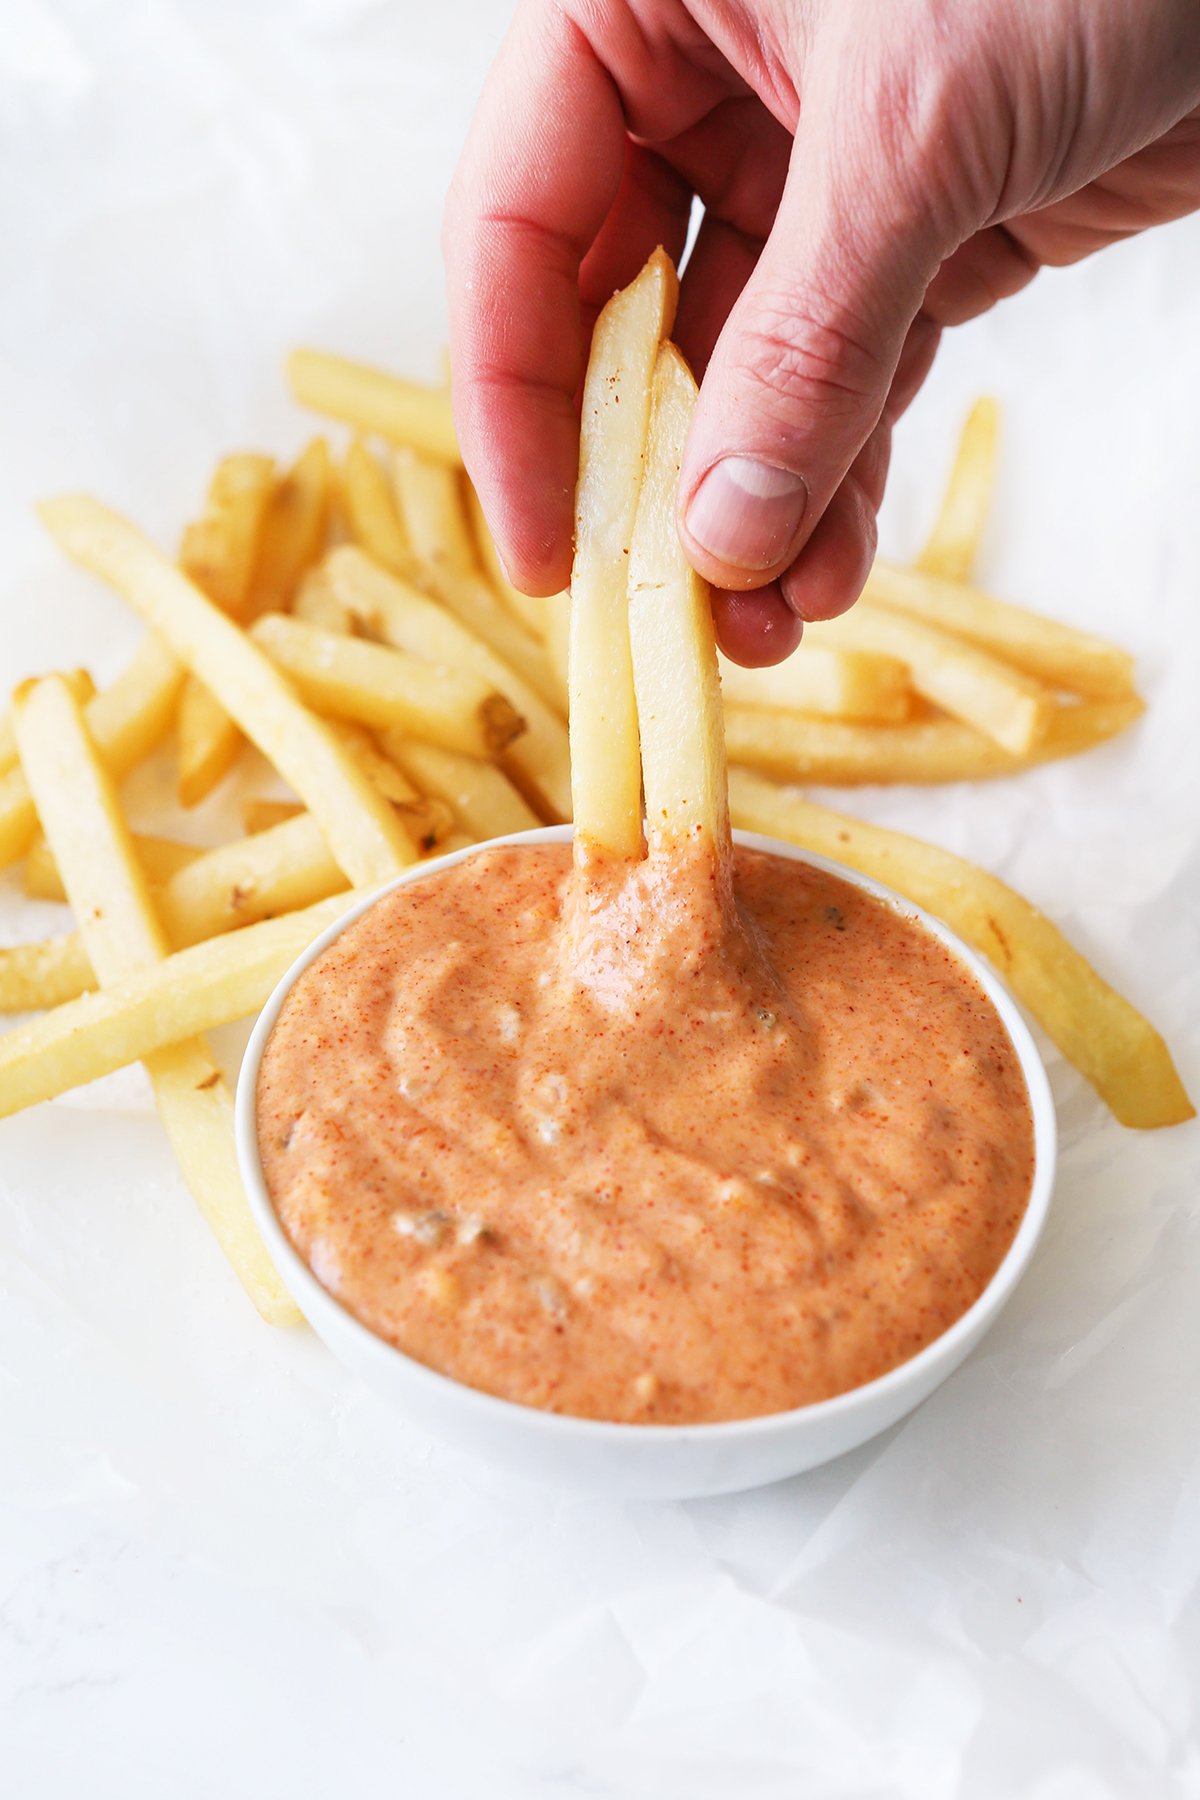 Hand dipping two french fries into a small bowl of crave sauce.